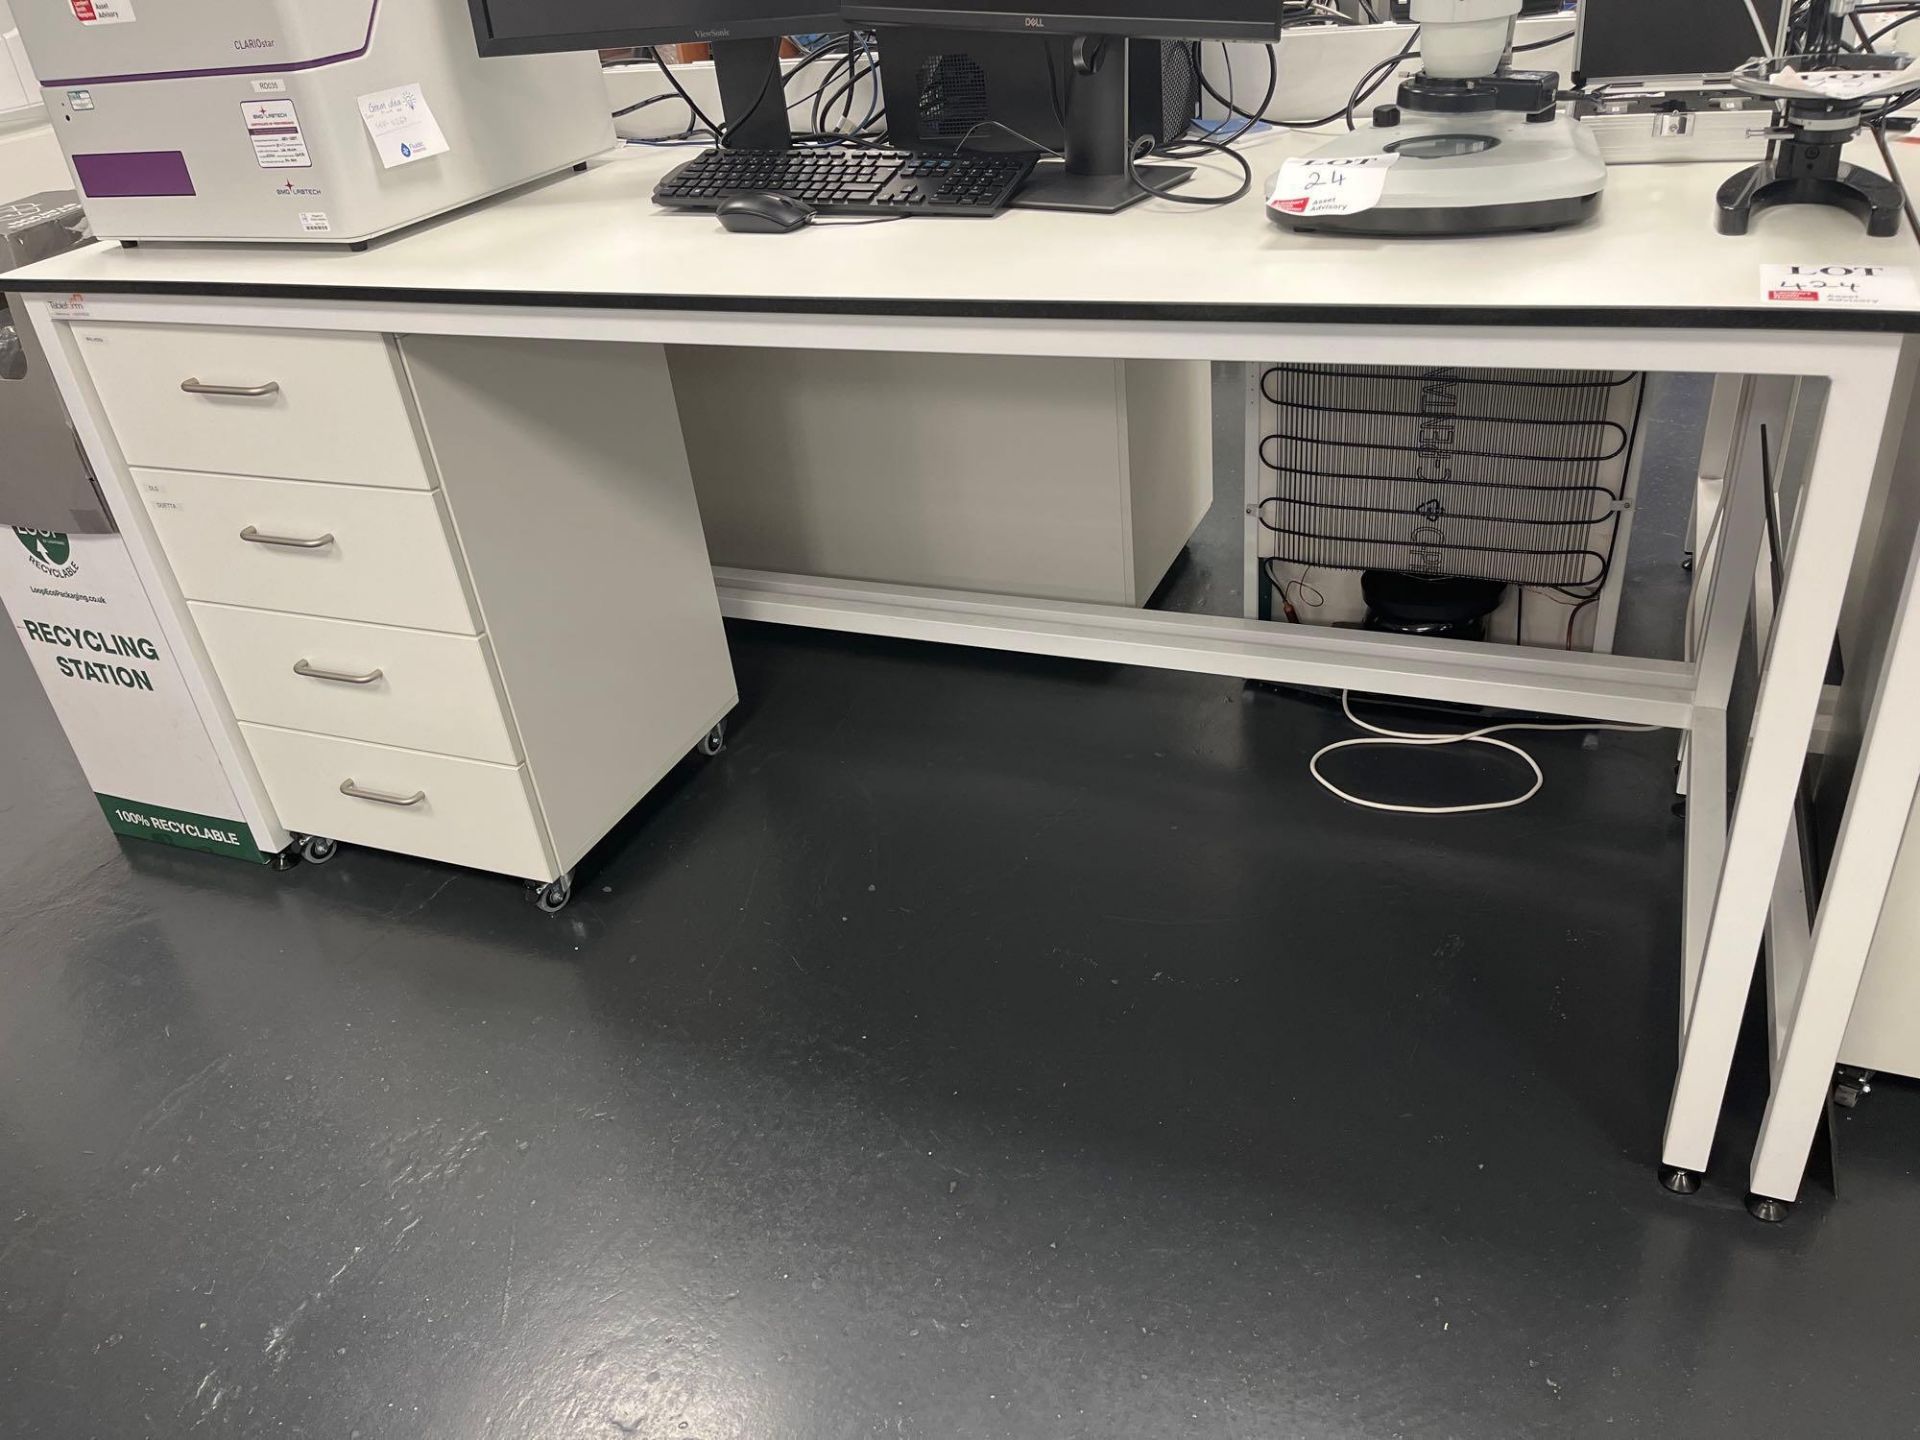 Tableform white laboratory workbench with white two door cabinet (excludes contents) (approximately